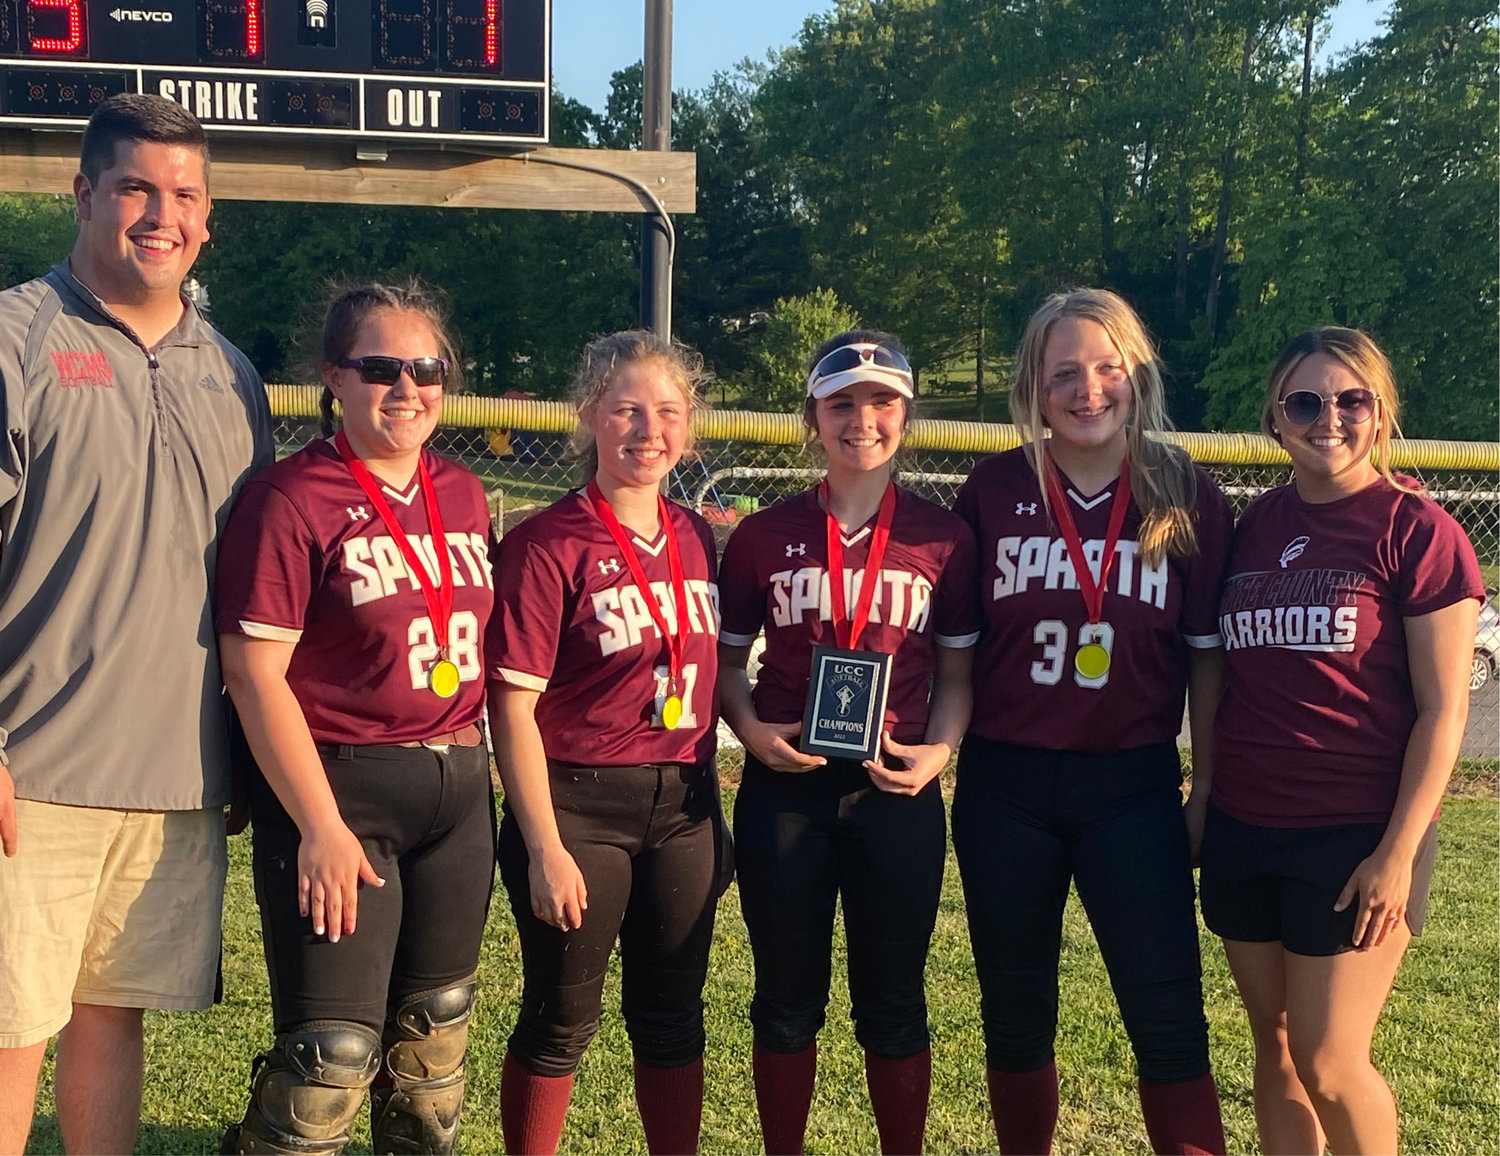 White County coaches were allowed to choose four players for the all-tournament team. Those four players were Mabry Taylor (8th grade pitcher), Kylie Norvell (8th grade shortstop/pitcher), Callie Phillips (8th grade catcher), and Addison Howell (8th grade third baseman/pitcher). Also pictured is Coach Austin Allen.